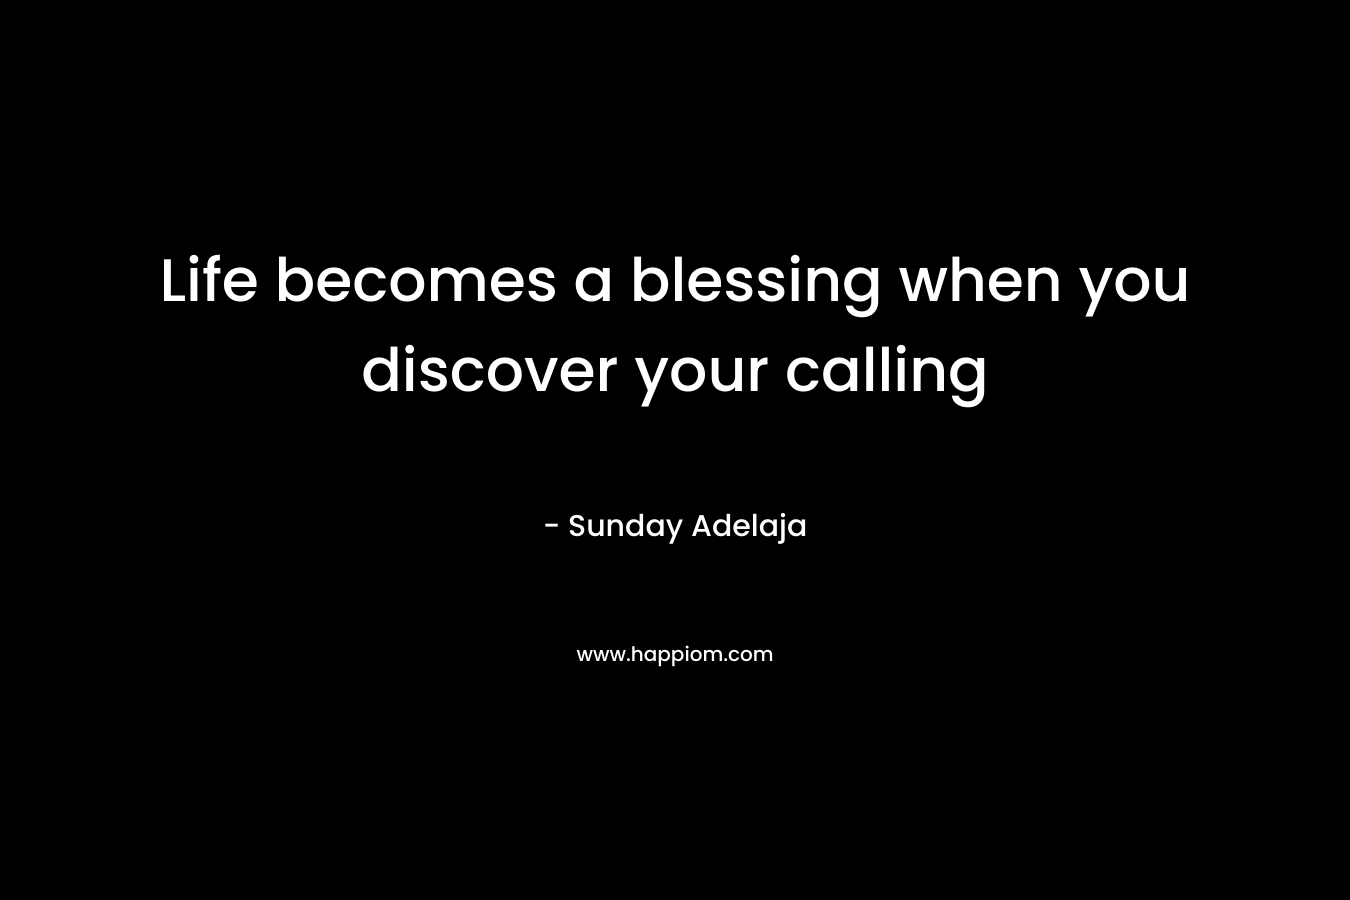 Life becomes a blessing when you discover your calling